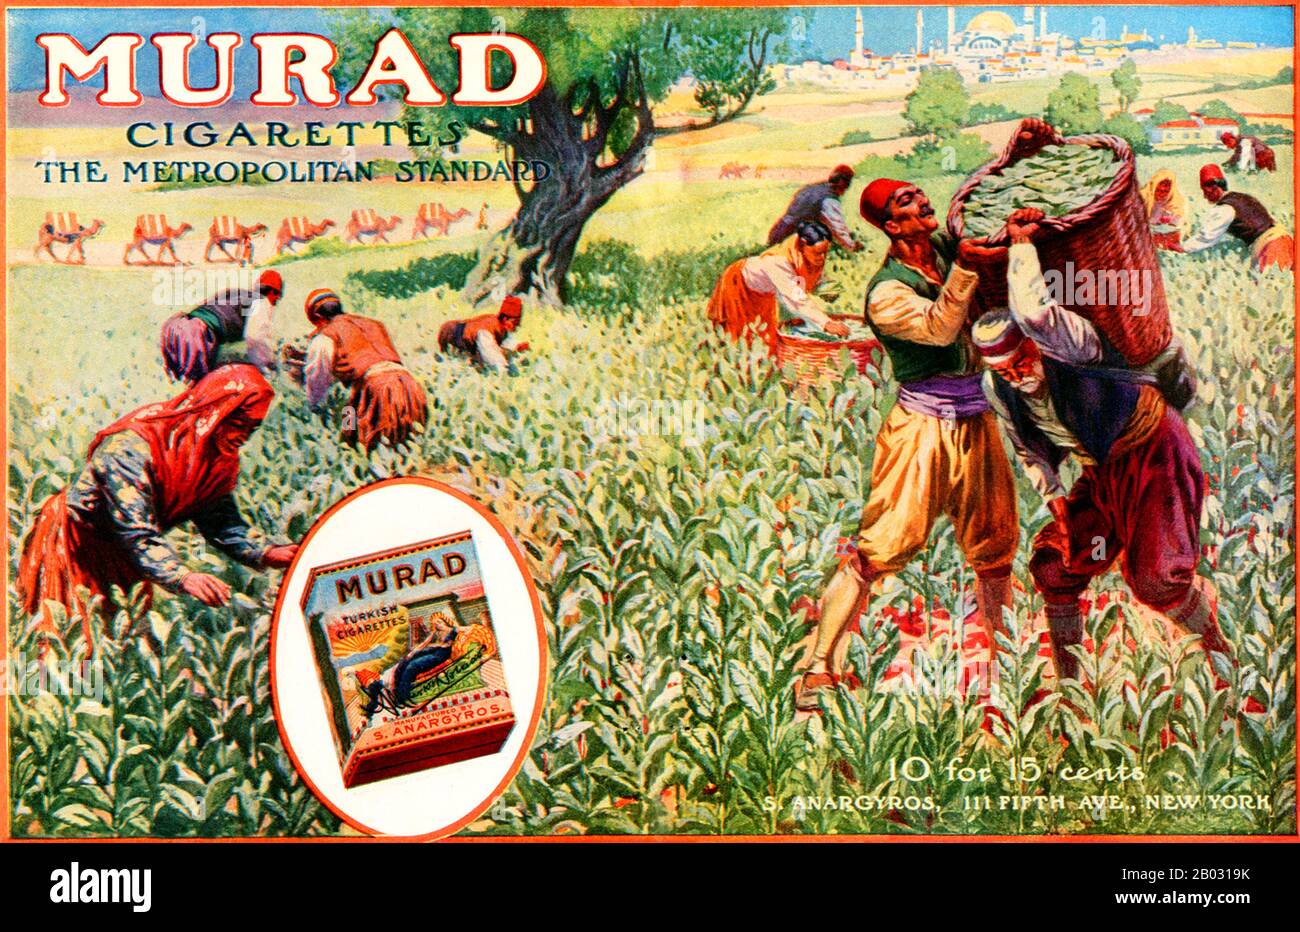 In the early 1900s, manufactures of Turkish and Egyptian cigarettes tripled their sales and became major competitors to leading brands. The New York-based Greek tobacconist Soterios Anargyros produced hand-rolled Murad cigarettes, made of pure Turkish tobacco.  Many of the Murad advertisements  others incorporated Orientalist motifs or models dressed in Middle Eastern dress. Stock Photo